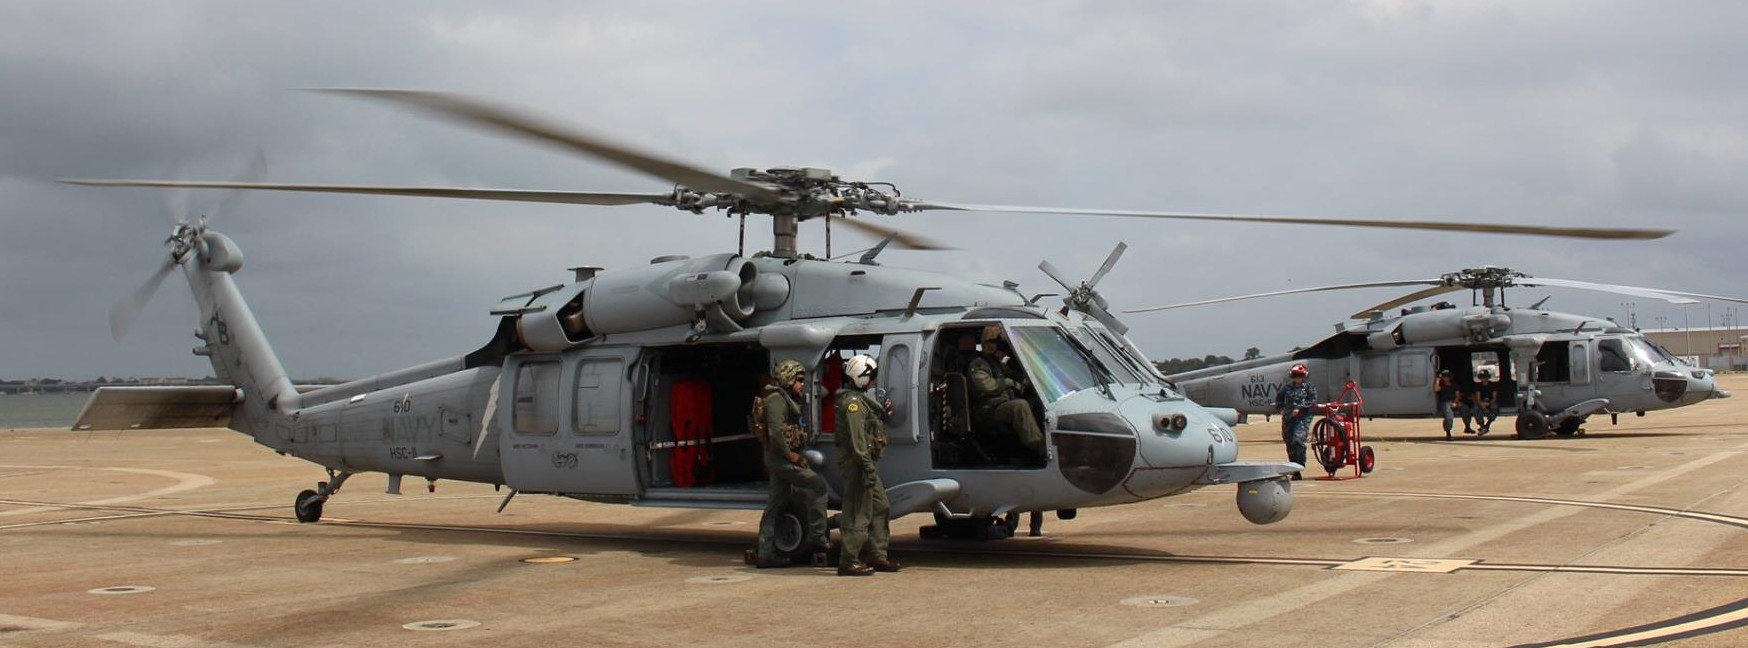 hsc-11 dragonslayers mh-60s seahawk carrier air wing cvw-1